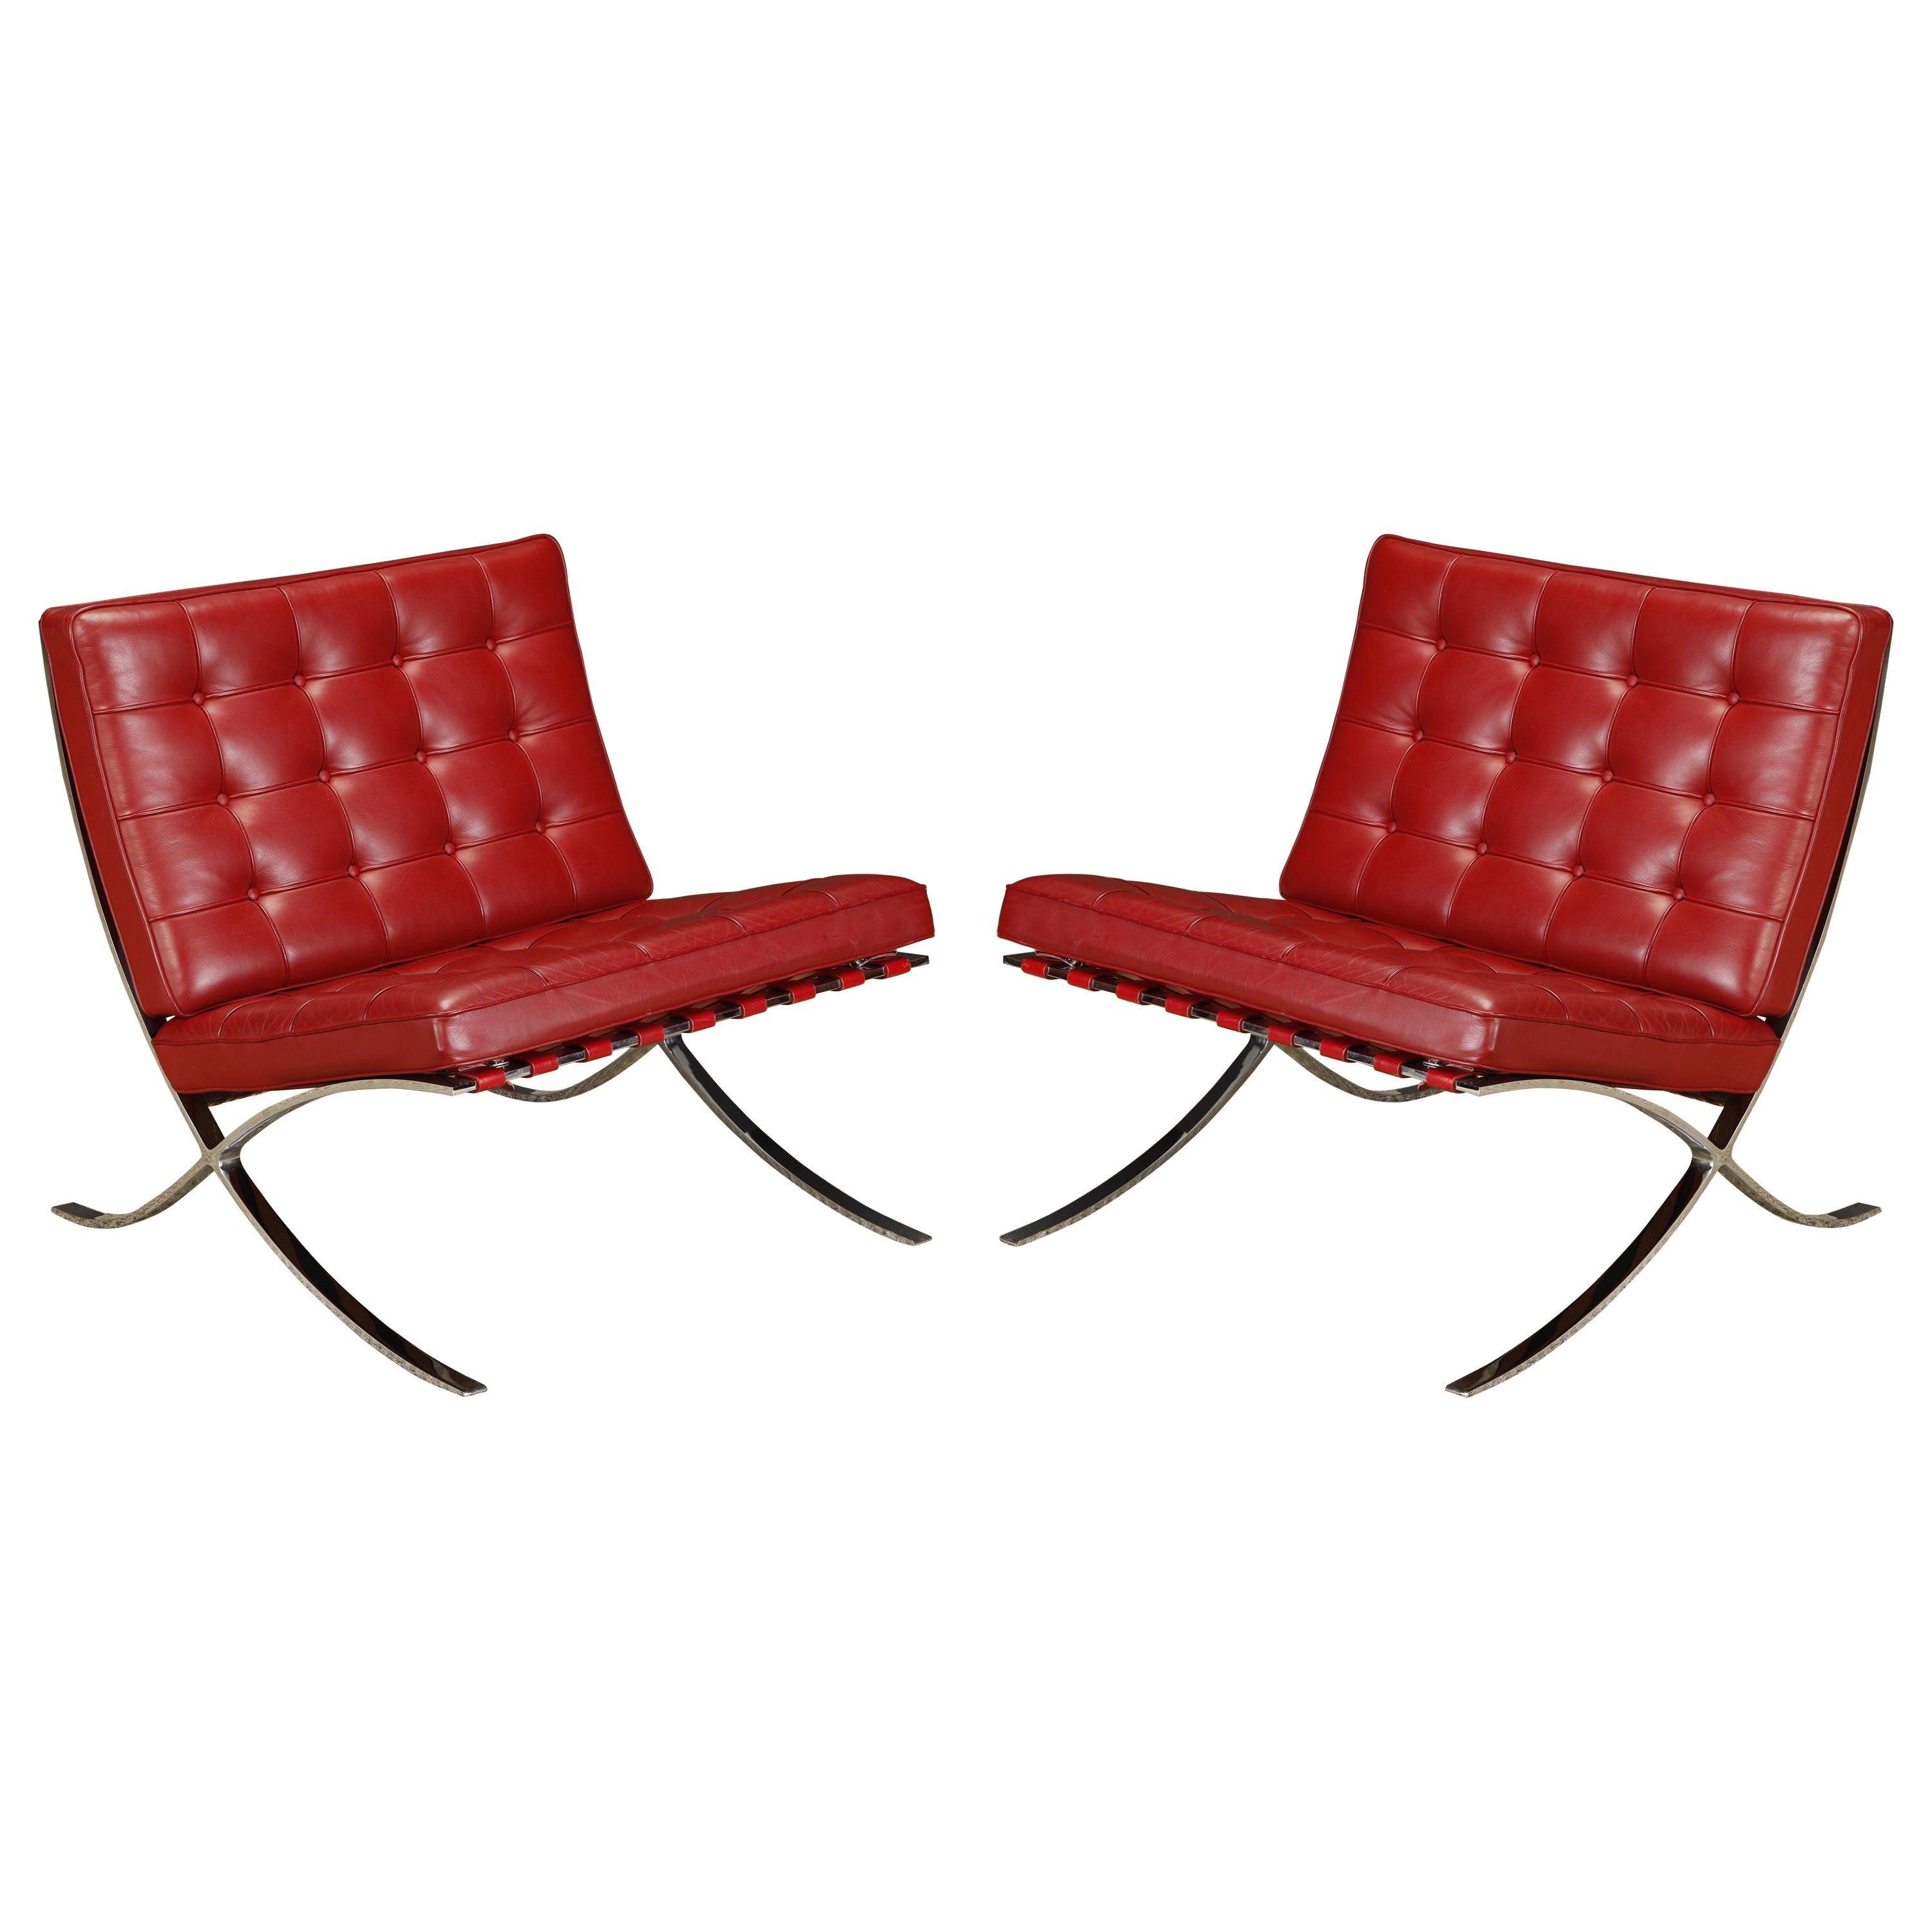 Pair of Barcelona Lounge Chairs by Mies van der Rohe for Knoll Studios, Signed